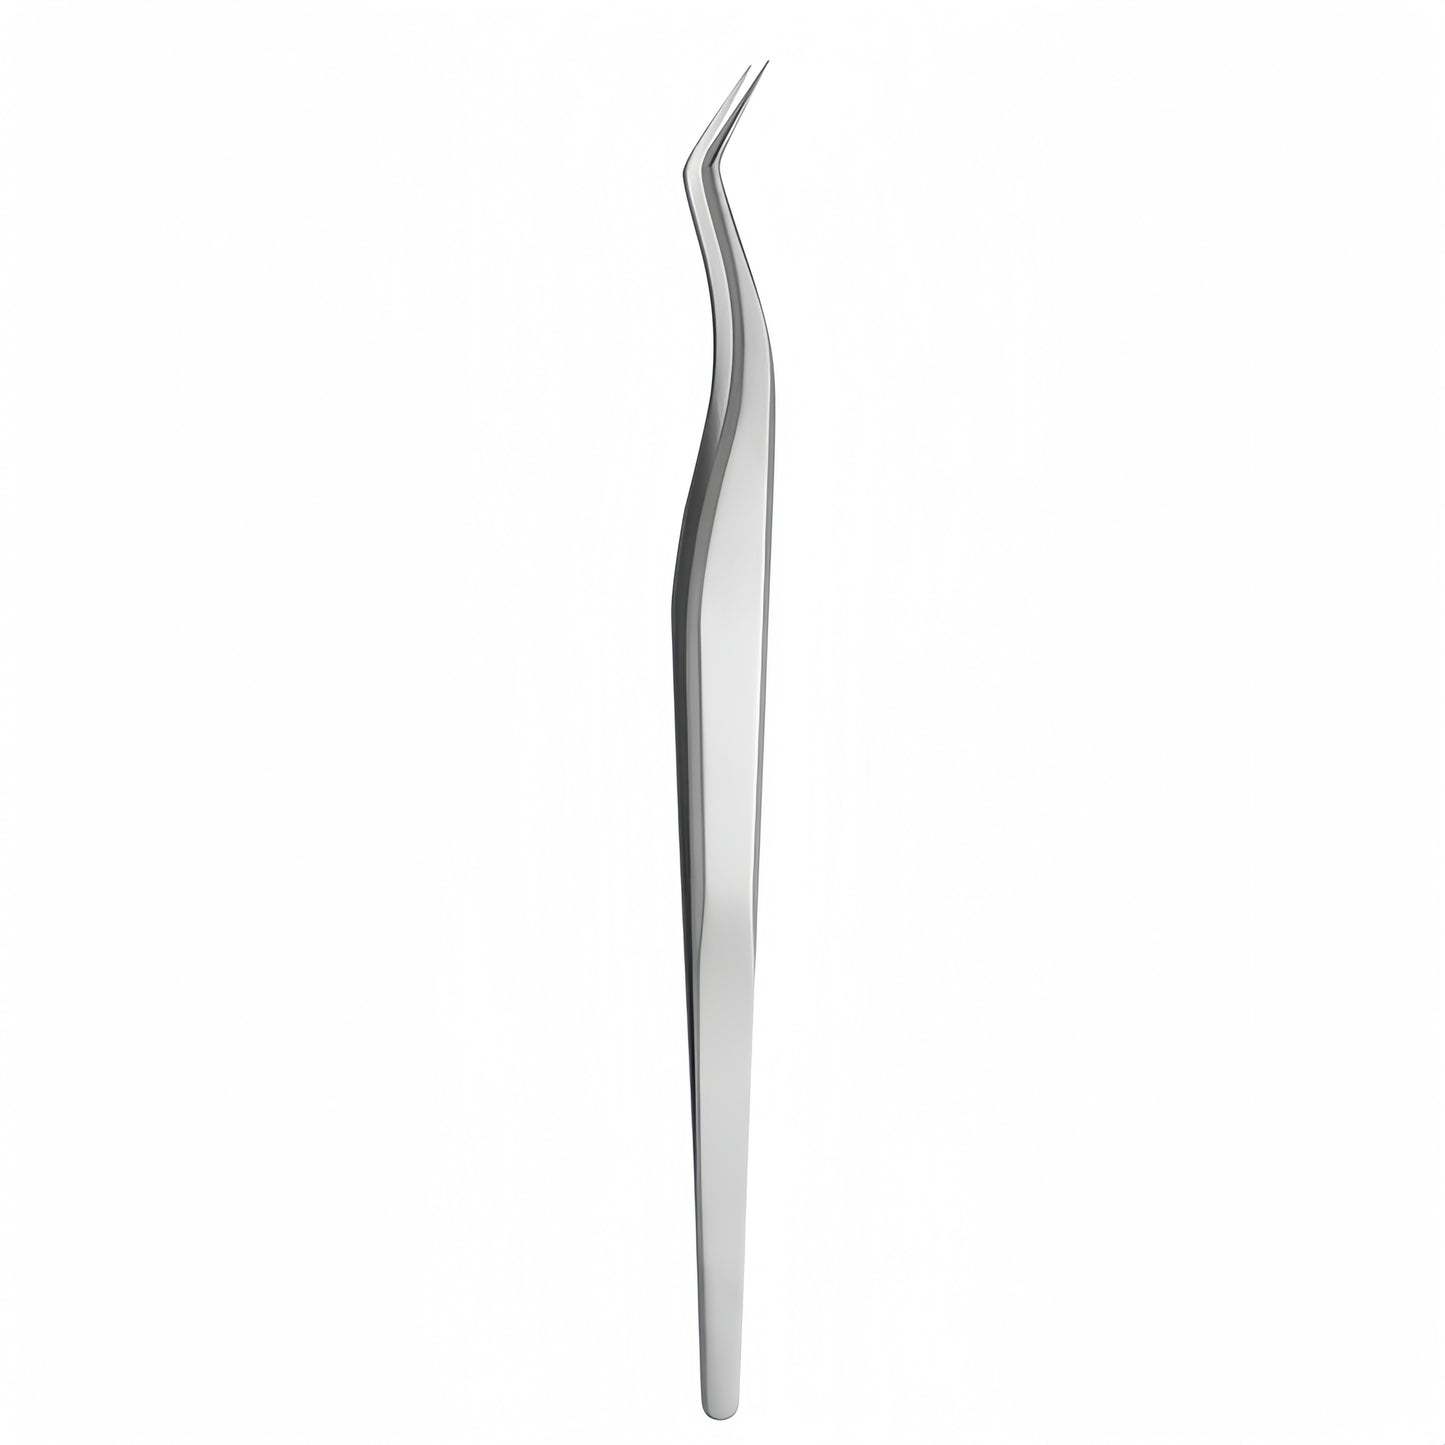 High Quality Titanium Alloy Eyelash Extensions Tweezers Enough Light and Easy Grip - Type E